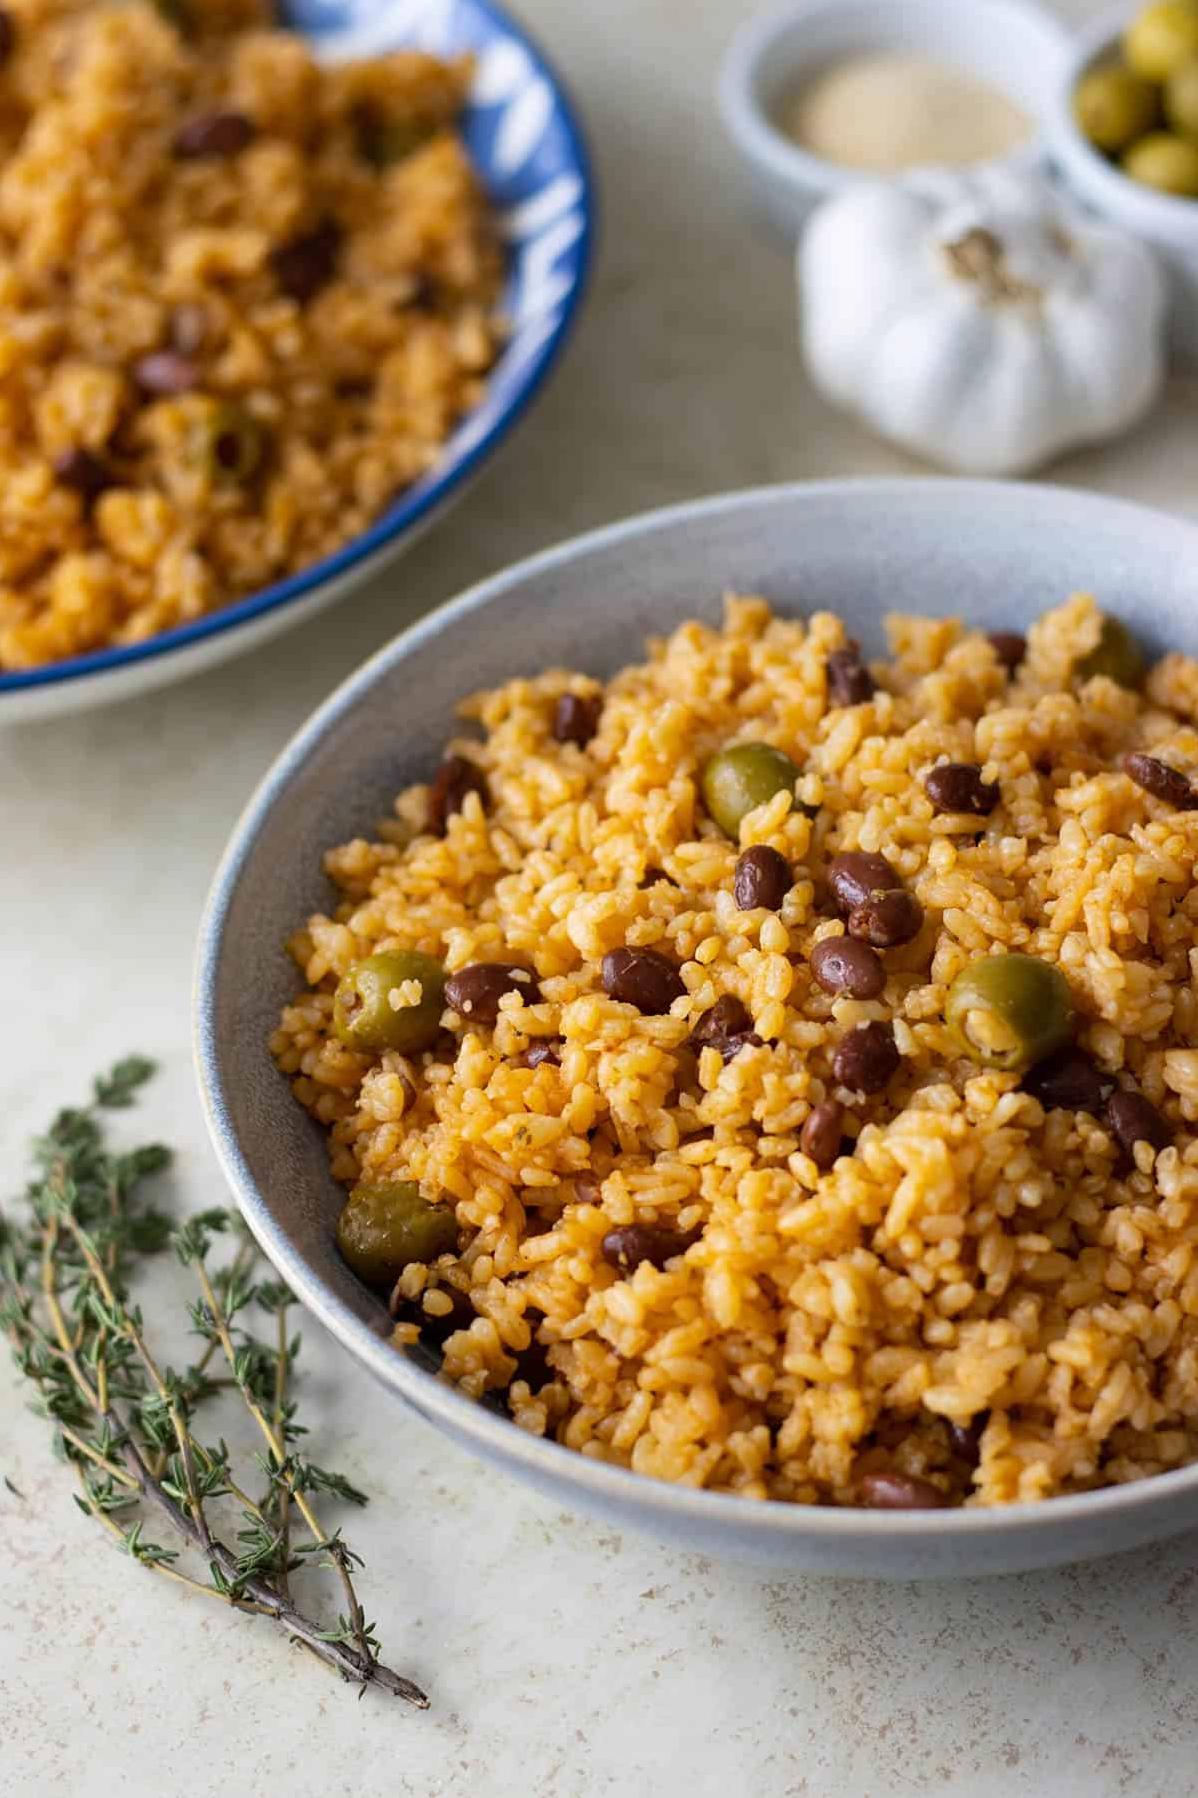  A true island favorite, this arroz con habichuelas recipe is packed with flavor and nutrition.